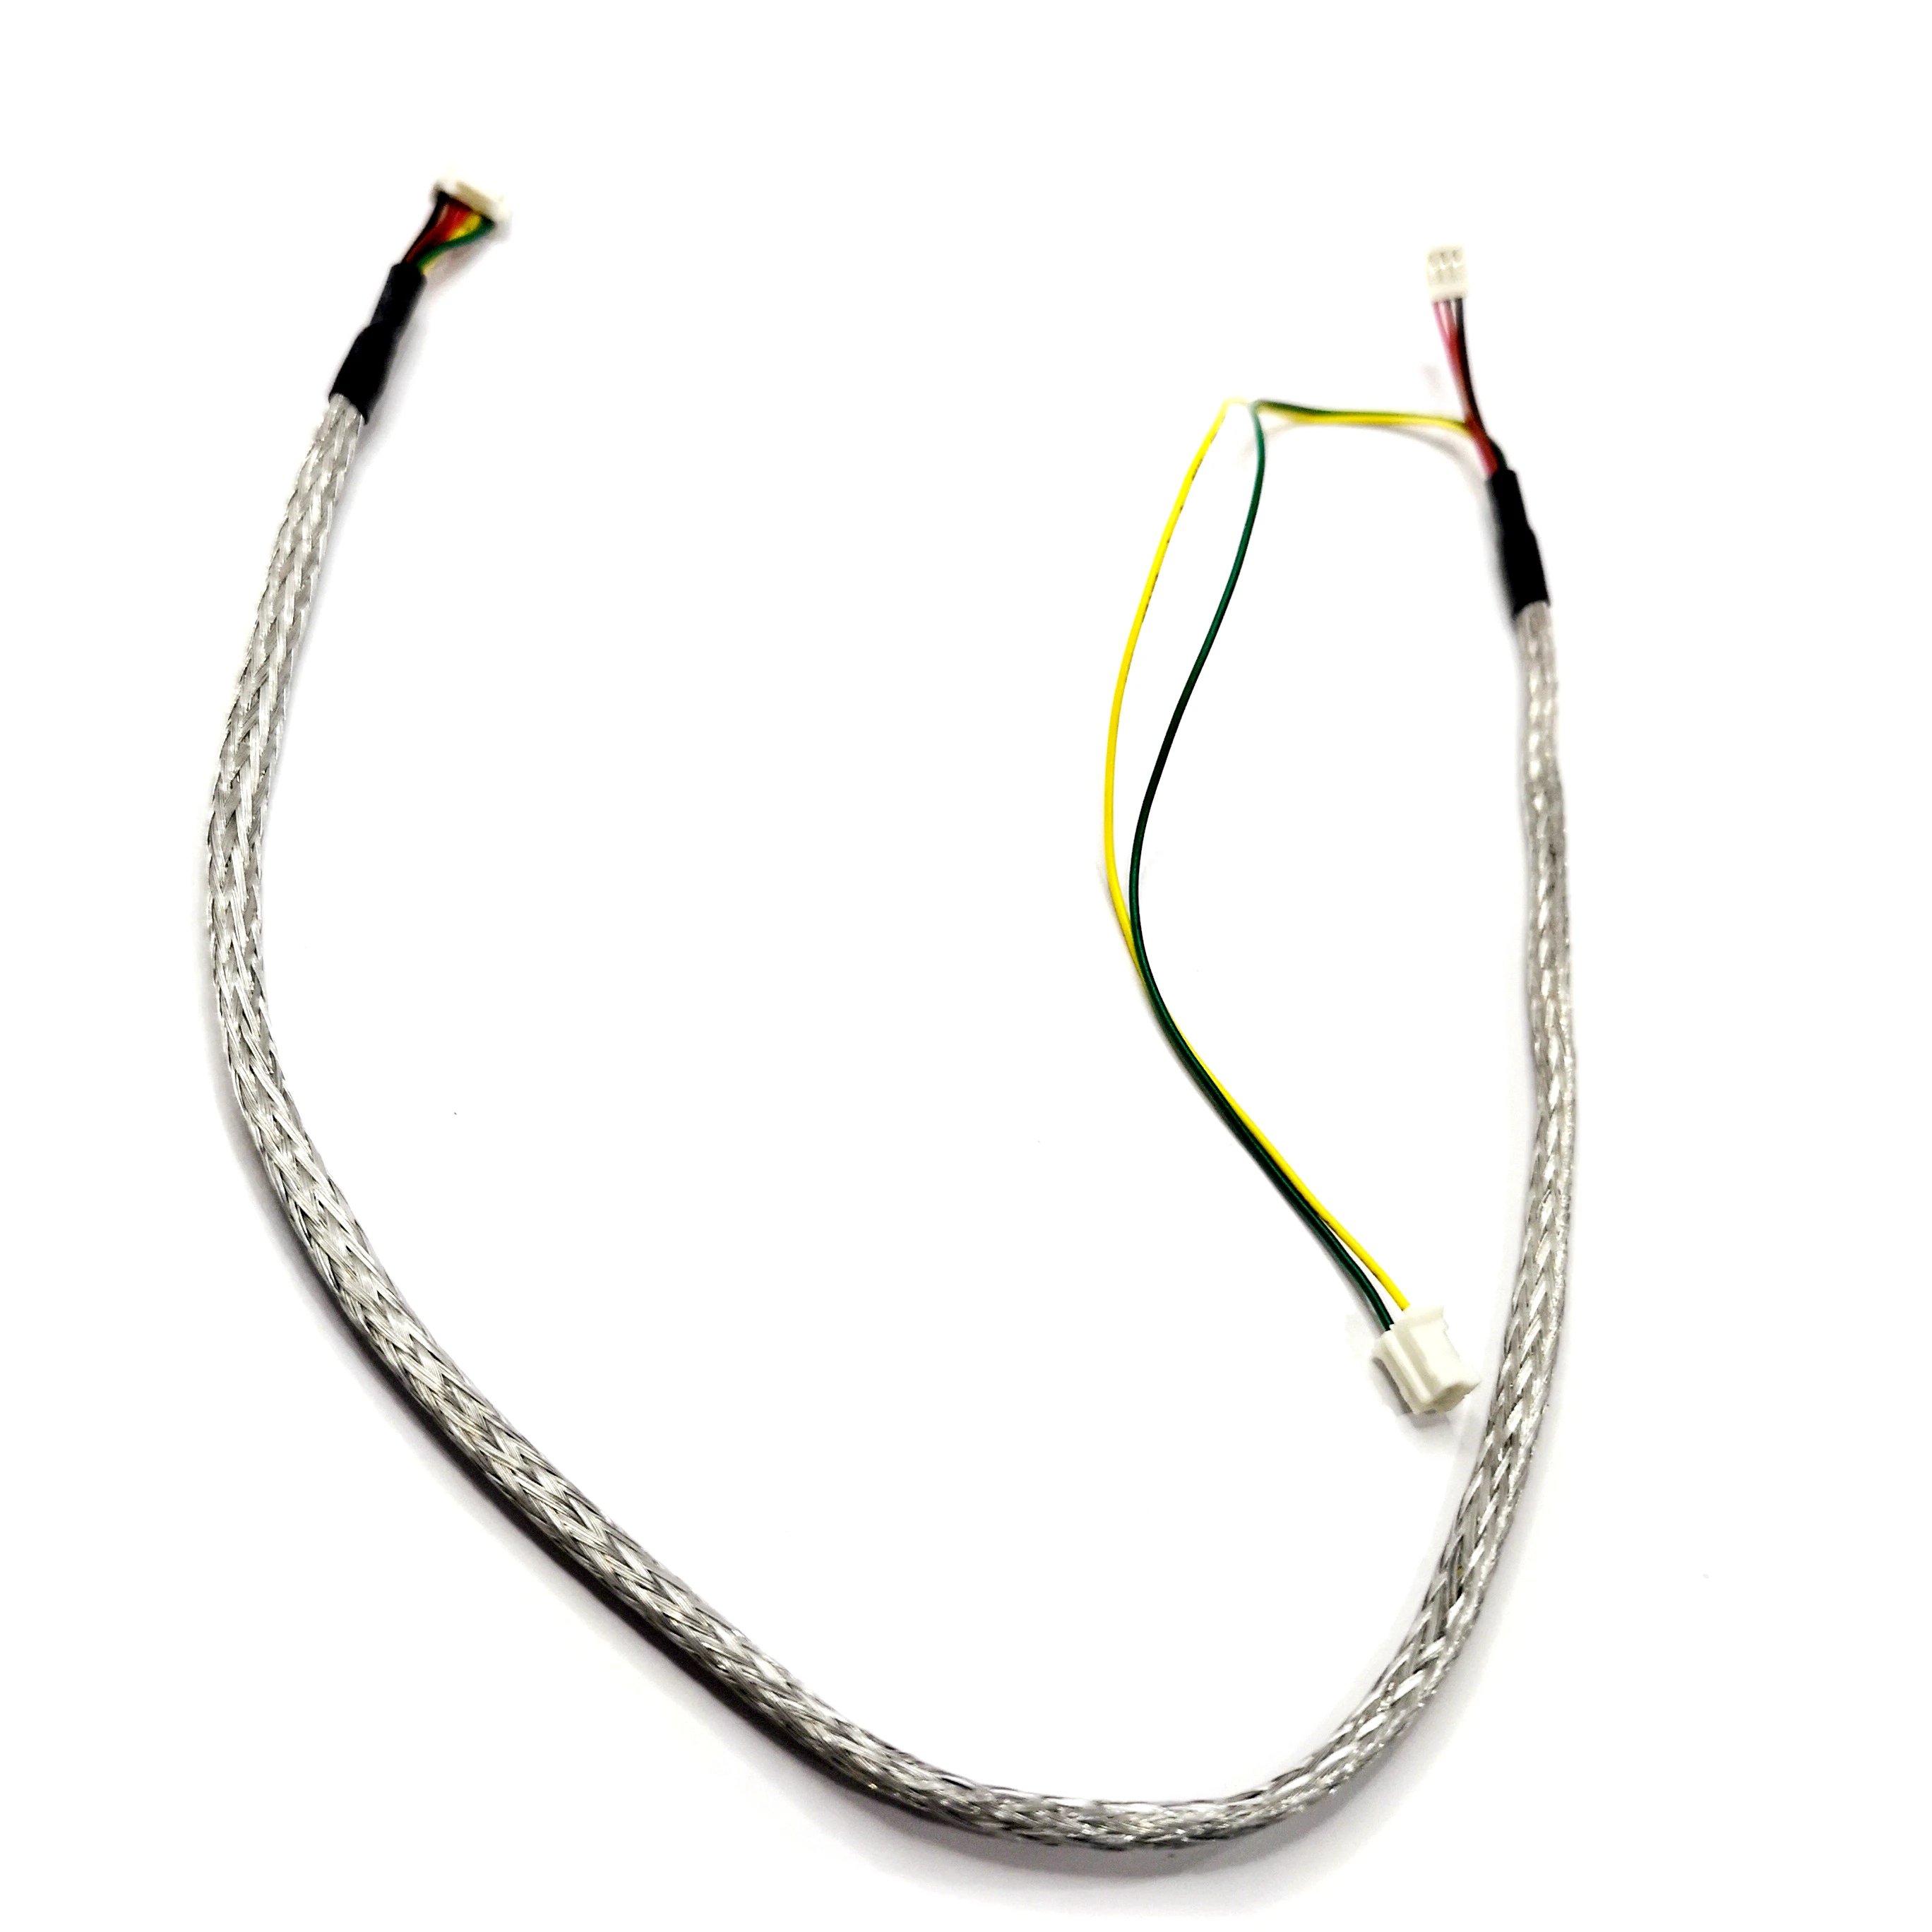 Custom Te Jst Molex Original or Copy Connector Terminal Wiring Harness Cable Assembly for Automotive Car